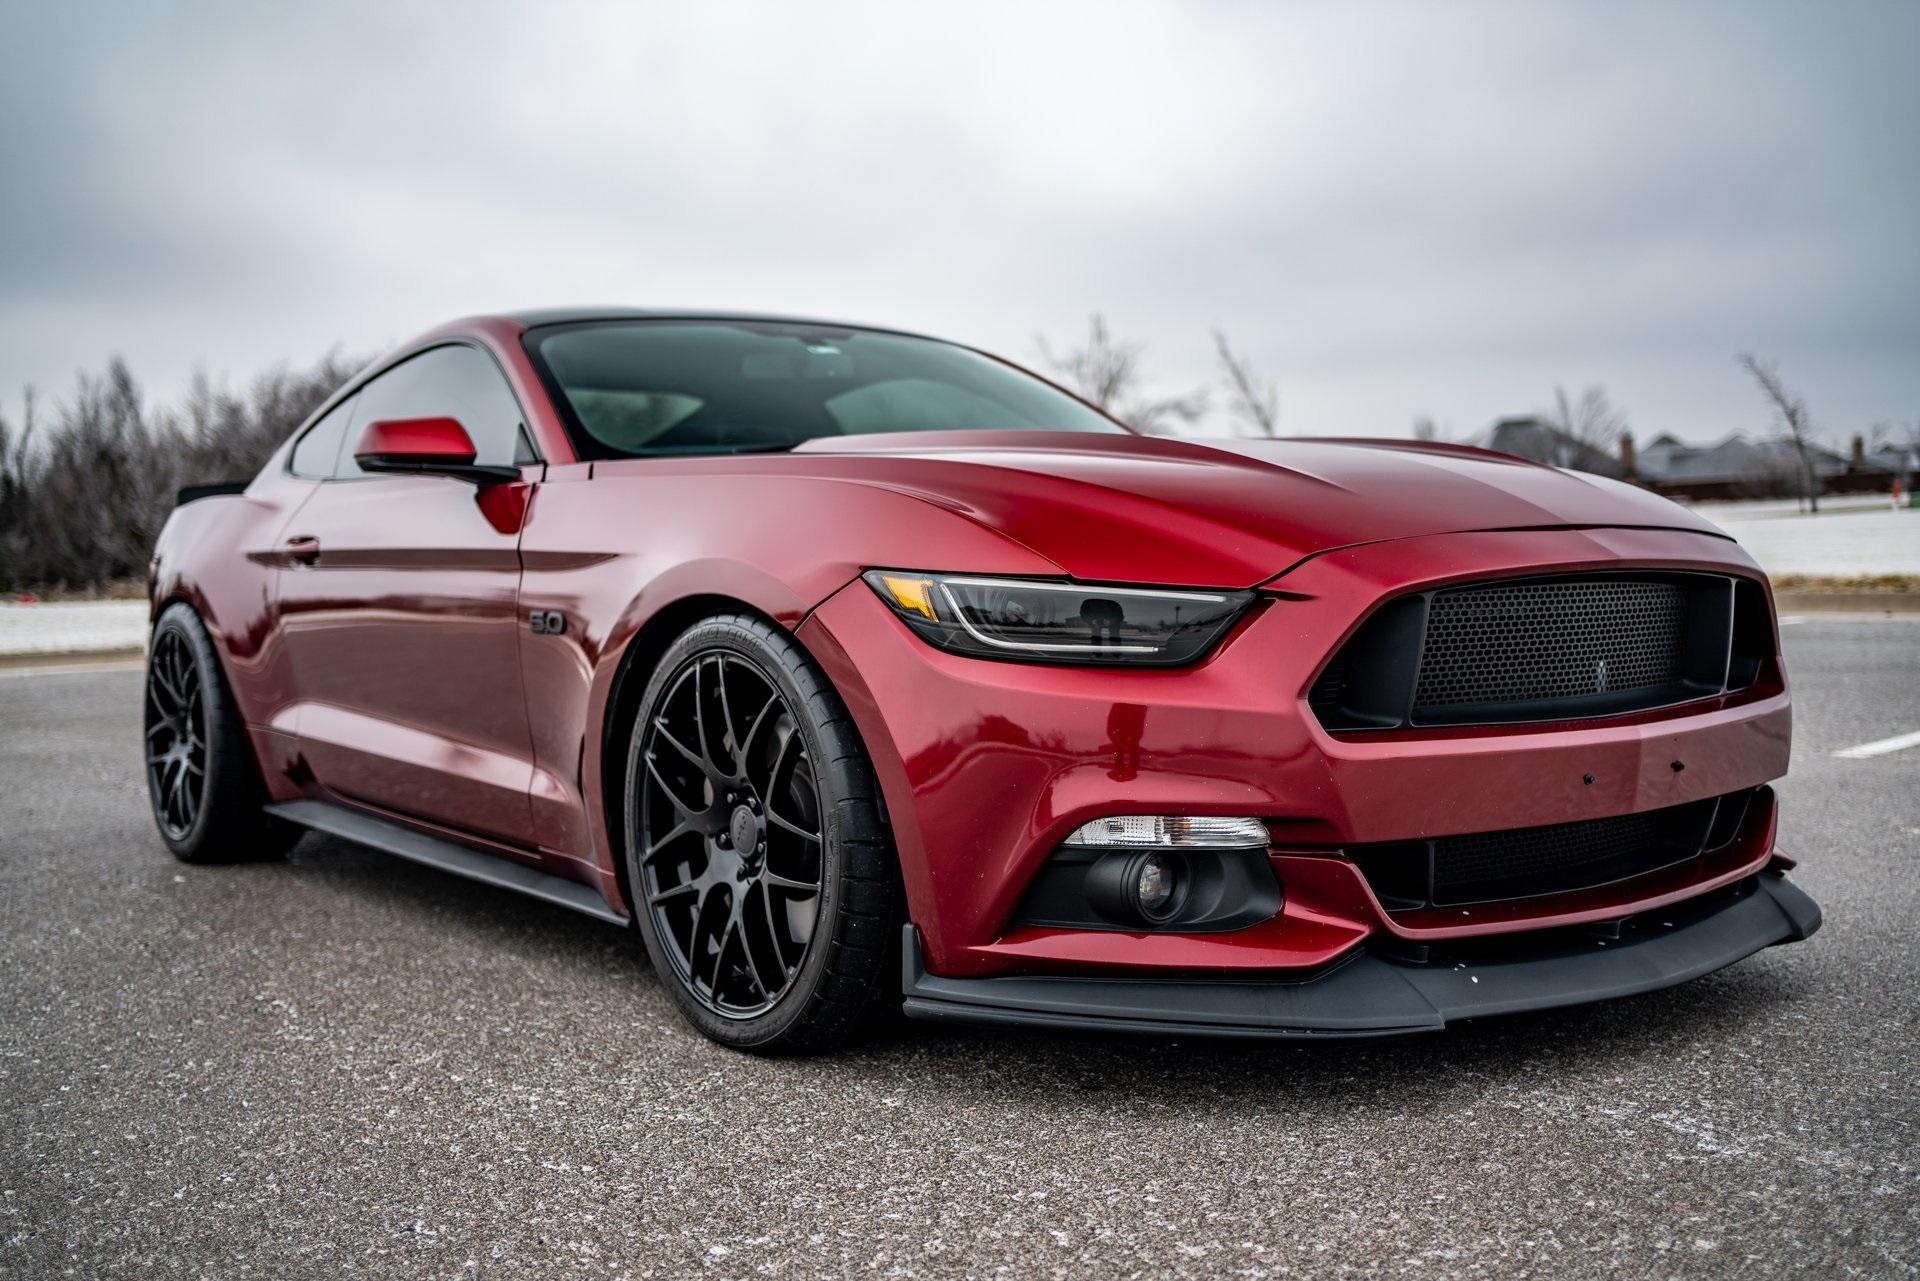 Mustang Of The Day: 2017 Ford Mustang GT